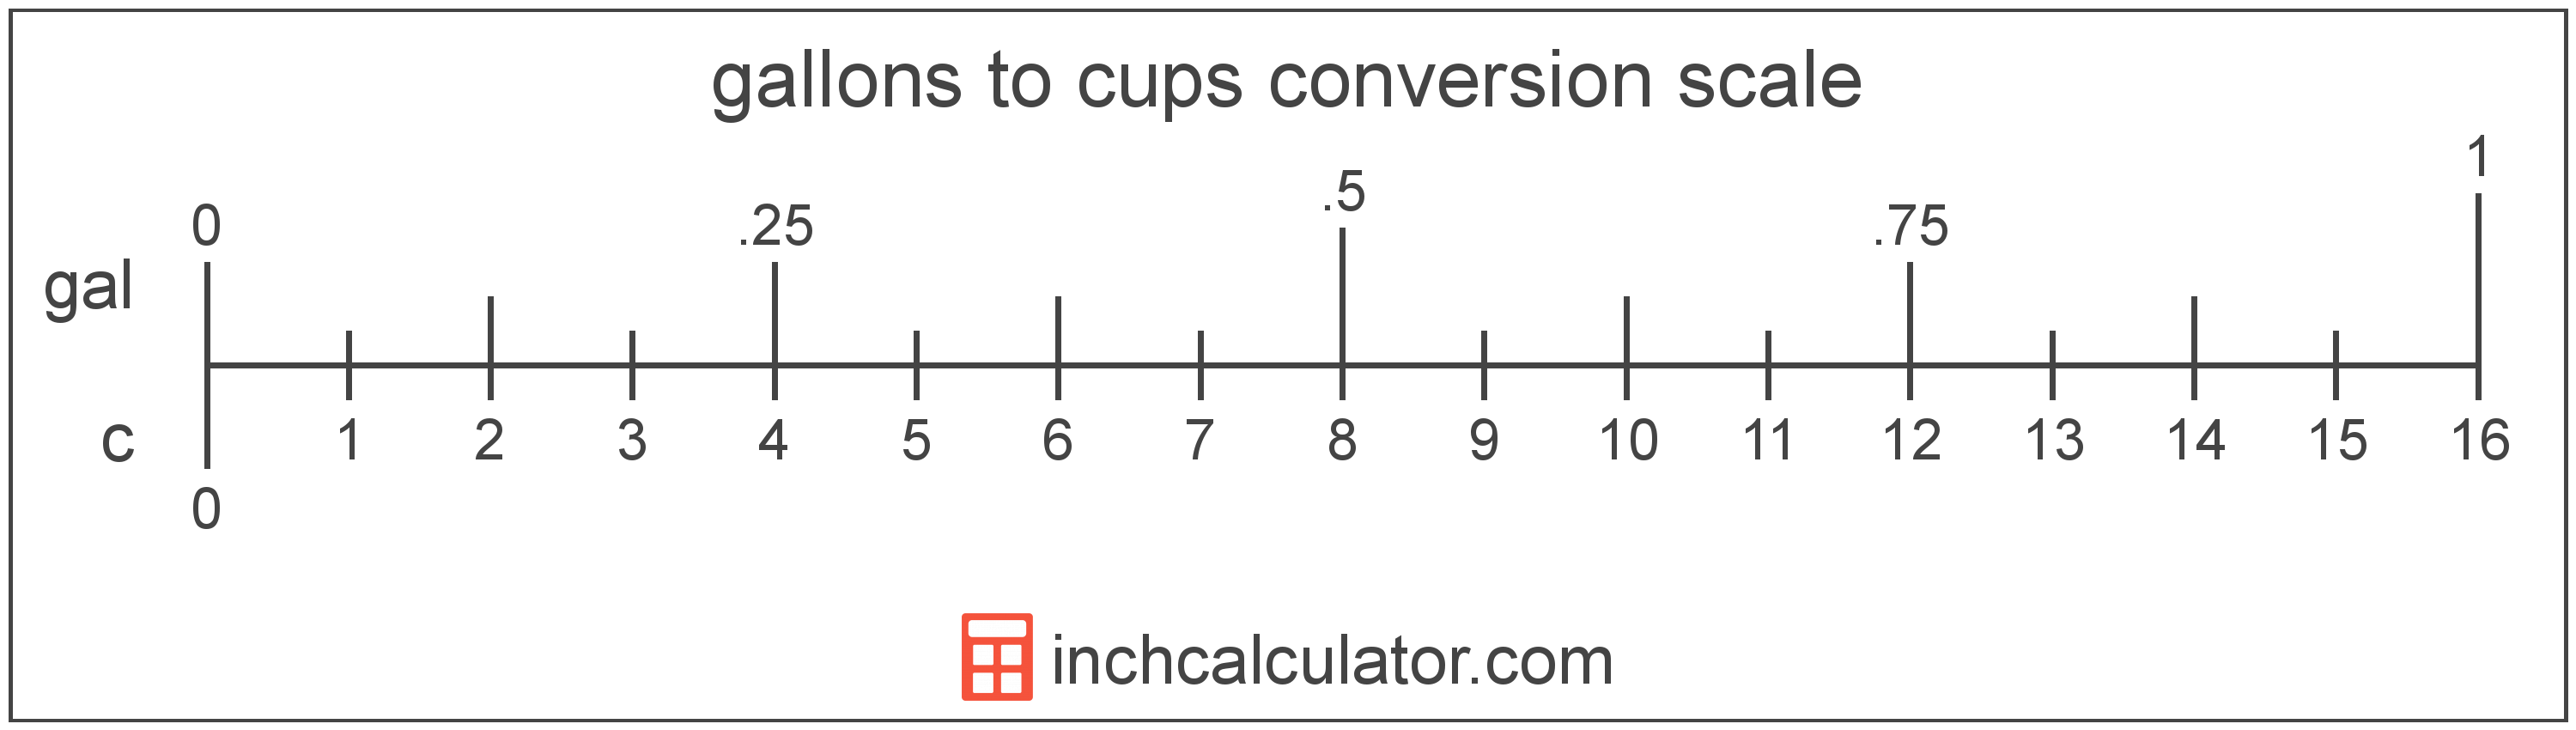 conversion scale showing gallons and equivalent cups volume values